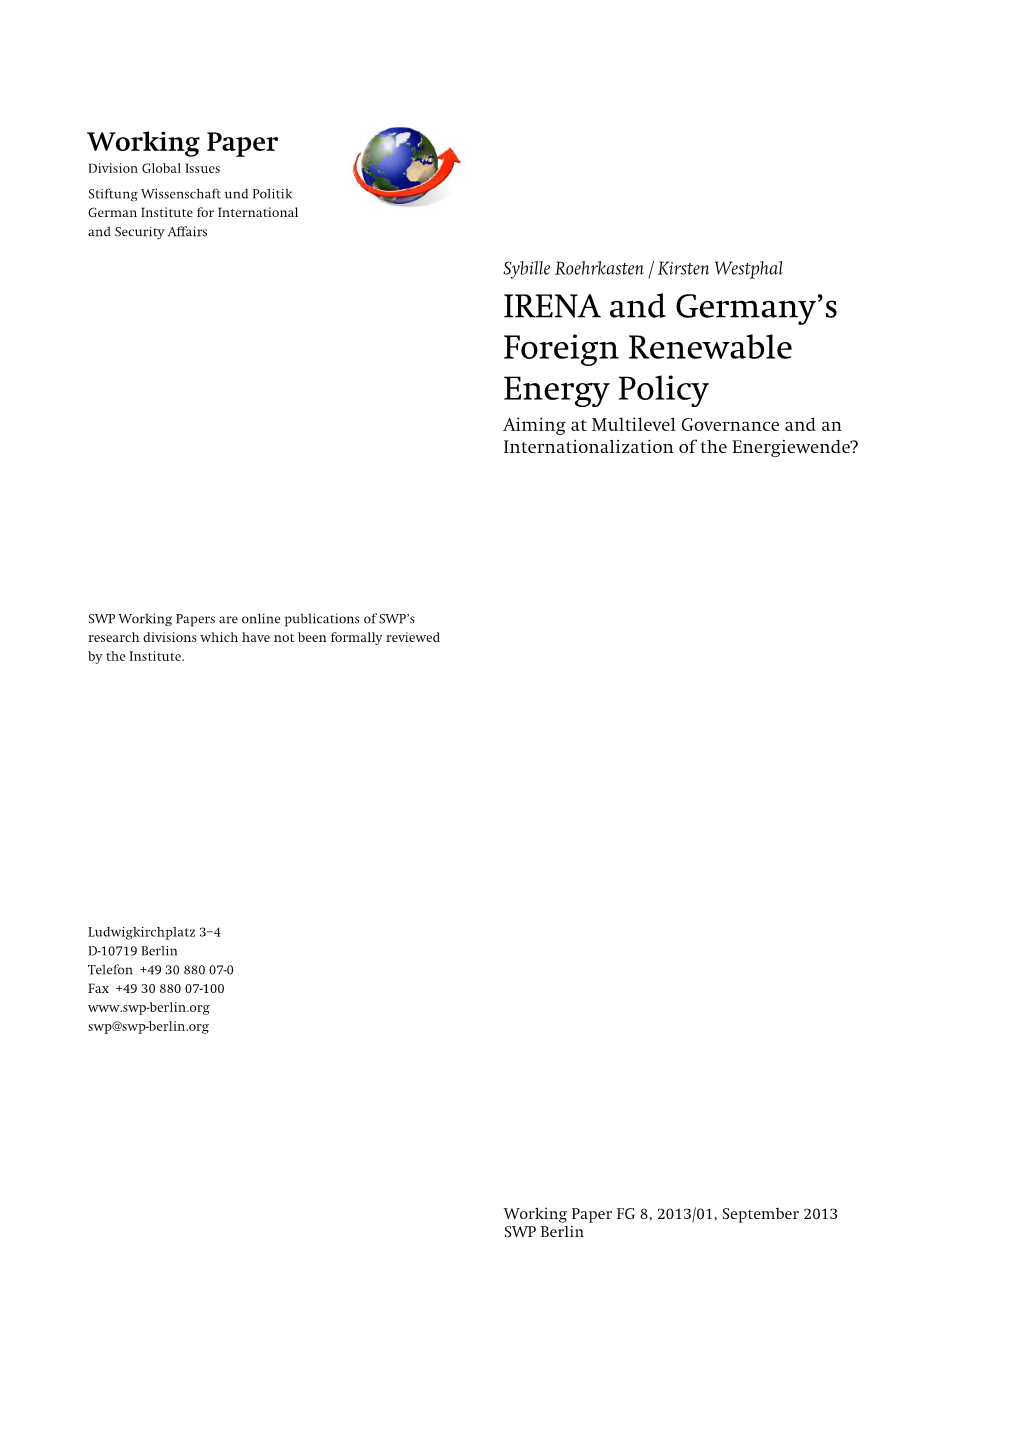 IRENA and Germany's Foreign Renewable Energy Policy